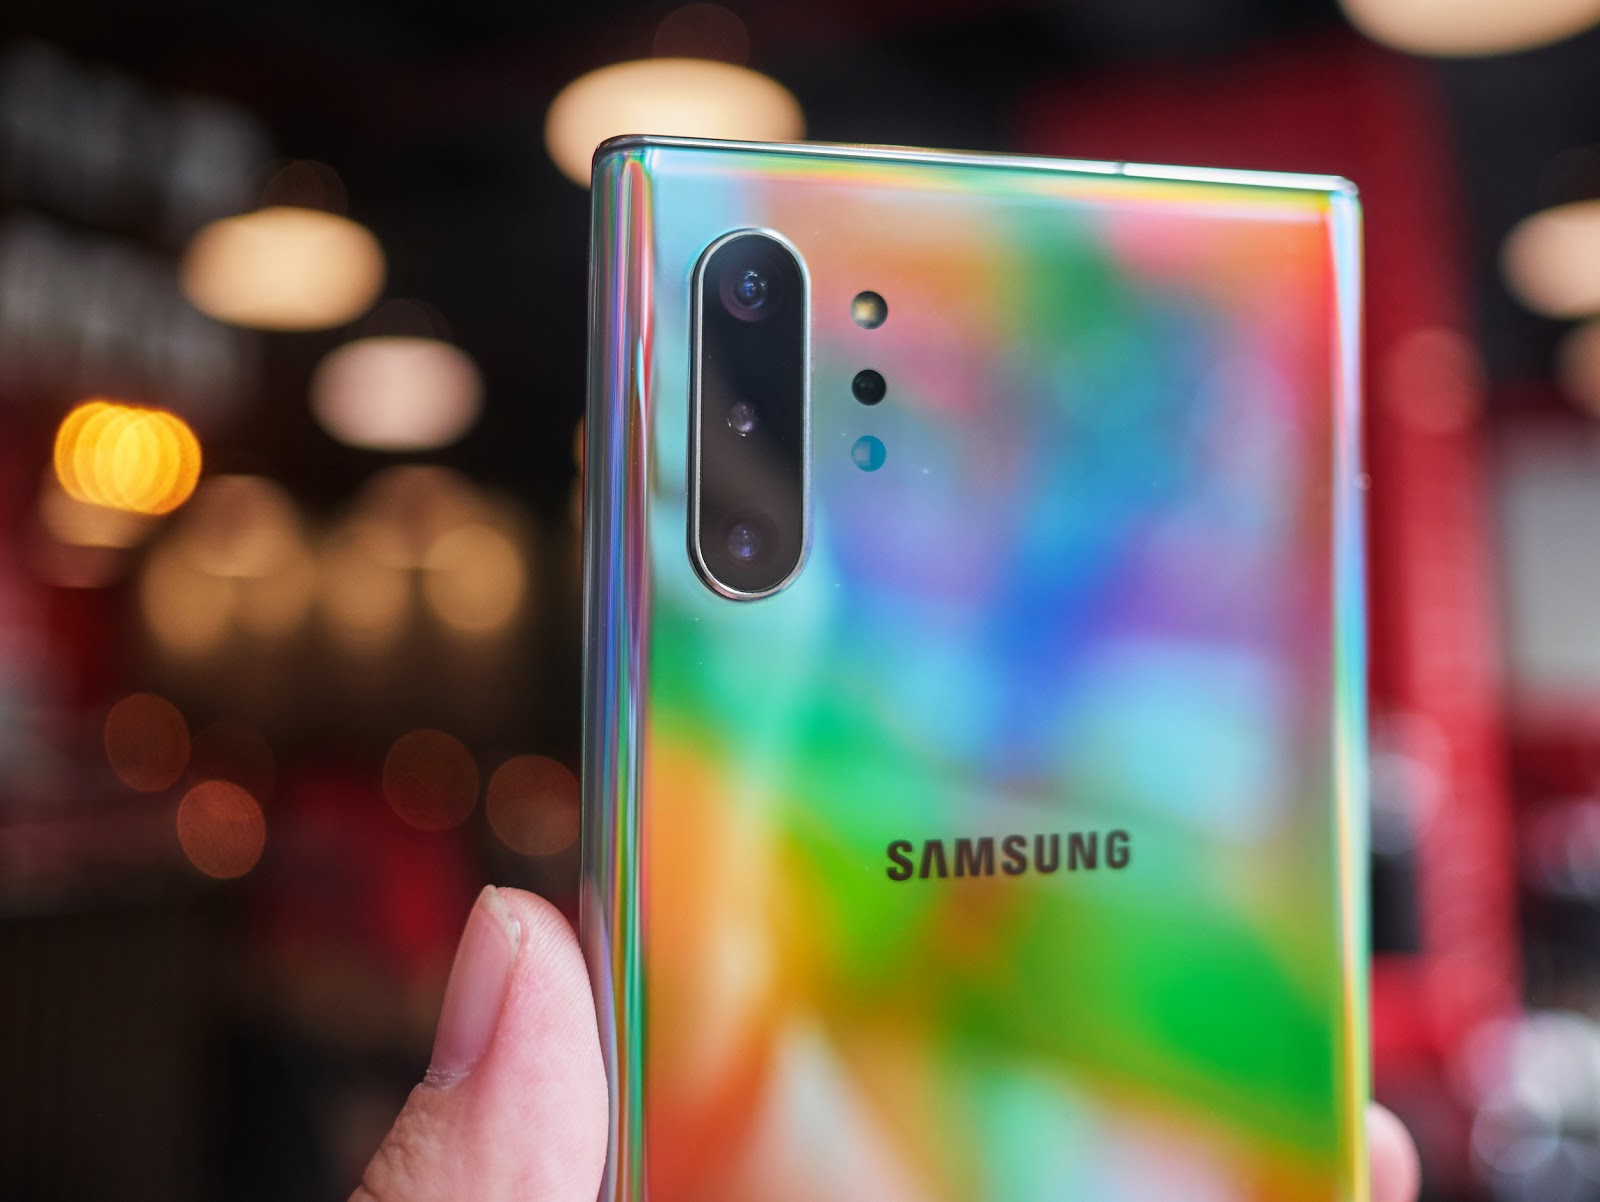 Samsung Galaxy Note 10 Plus - The Good Review